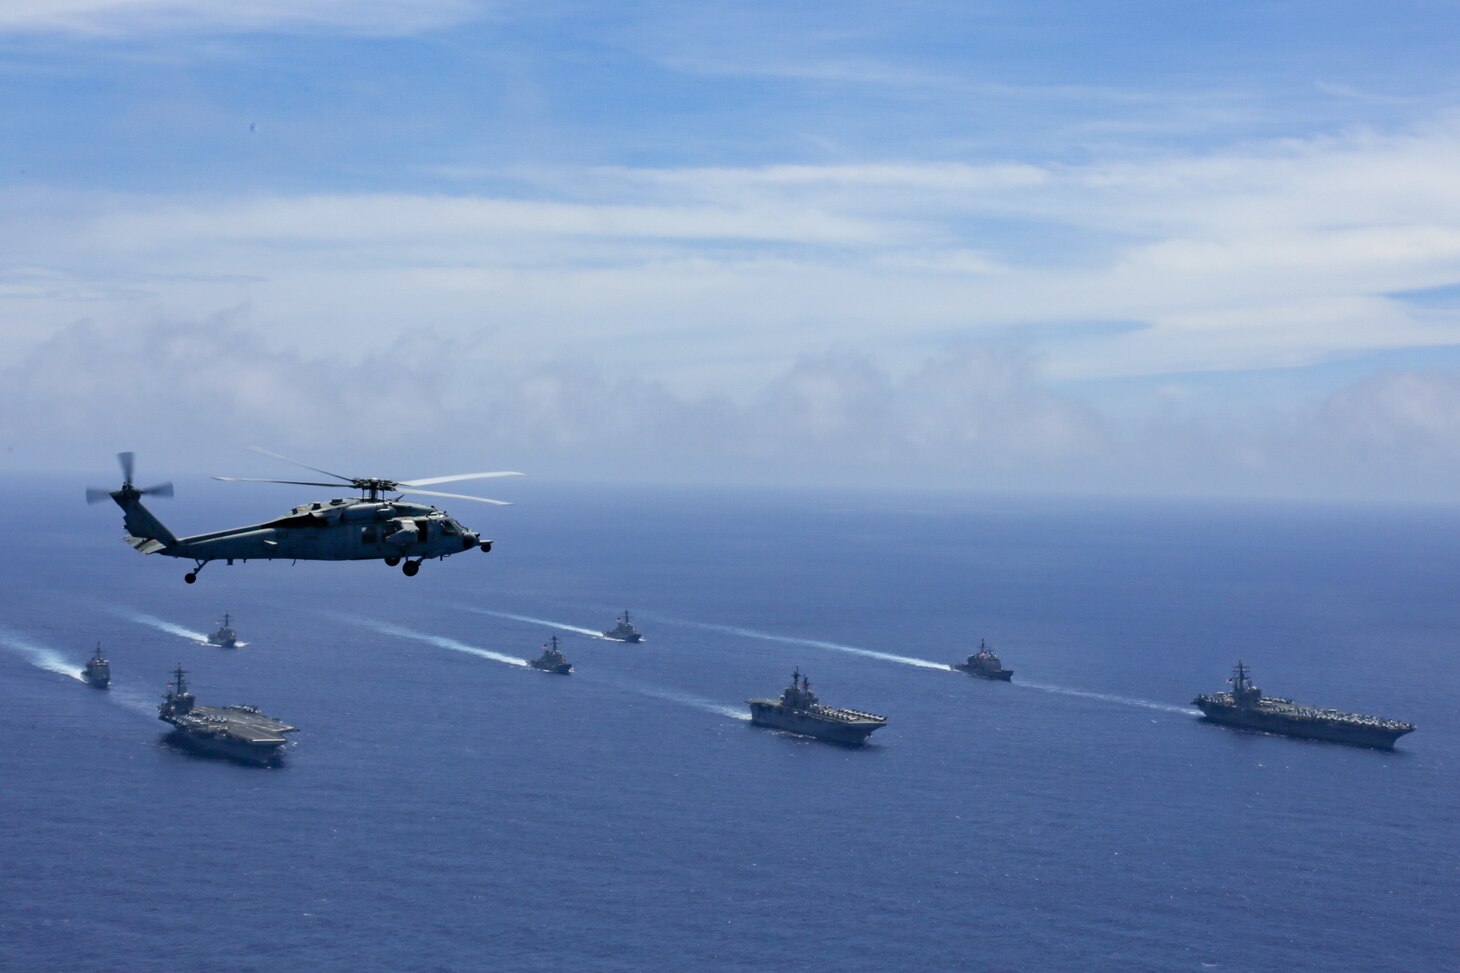 PHILIPPINE SEA (June 12, 2022) An MH-60S Sea Hawk helicopter, assigned to the “Chargers” of Helicopter Sea Combat Squadron (HSC) 14, flies above the Nimitz-class aircraft carrier USS Abraham Lincoln (CVN 72), front left, America-class amphibious assault ship USS Tripoli (LHA 7), front center, Nimitz-class aircraft carrier USS Ronald Reagan (CVN 76), front right, Ticonderoga-class guided-missile cruiser USS Mobile Bay (CG 53), middle left, Arleigh Burke-class guided-missile destroyer USS Benfold (DDG 65), middle center, Ticonderoga-class guided-missile cruiser USS Antietam (CG 54), middle right, Arleigh Burke-class guided-missile destroyer USS Spruance (DDG 111), back left, and Arleigh Burke-class guided-missile destroyer USS Fitzgerald (DDG 62) as they sail in formation during Valiant Shield 2022 (VS22). VS22 is a U.S.-only, biennial field training exercise (FTX) focused on integration of joint training in a multi-domain environment. This training builds real-world proficiency in sustaining joint forces through detecting, locating, tracking, and engaging units at sea, in the air, on land, and in cyberspace in response to a range of mission areas. (U.S. Navy photo by Mass Communication Specialist Seaman Aleksandr Freutel)